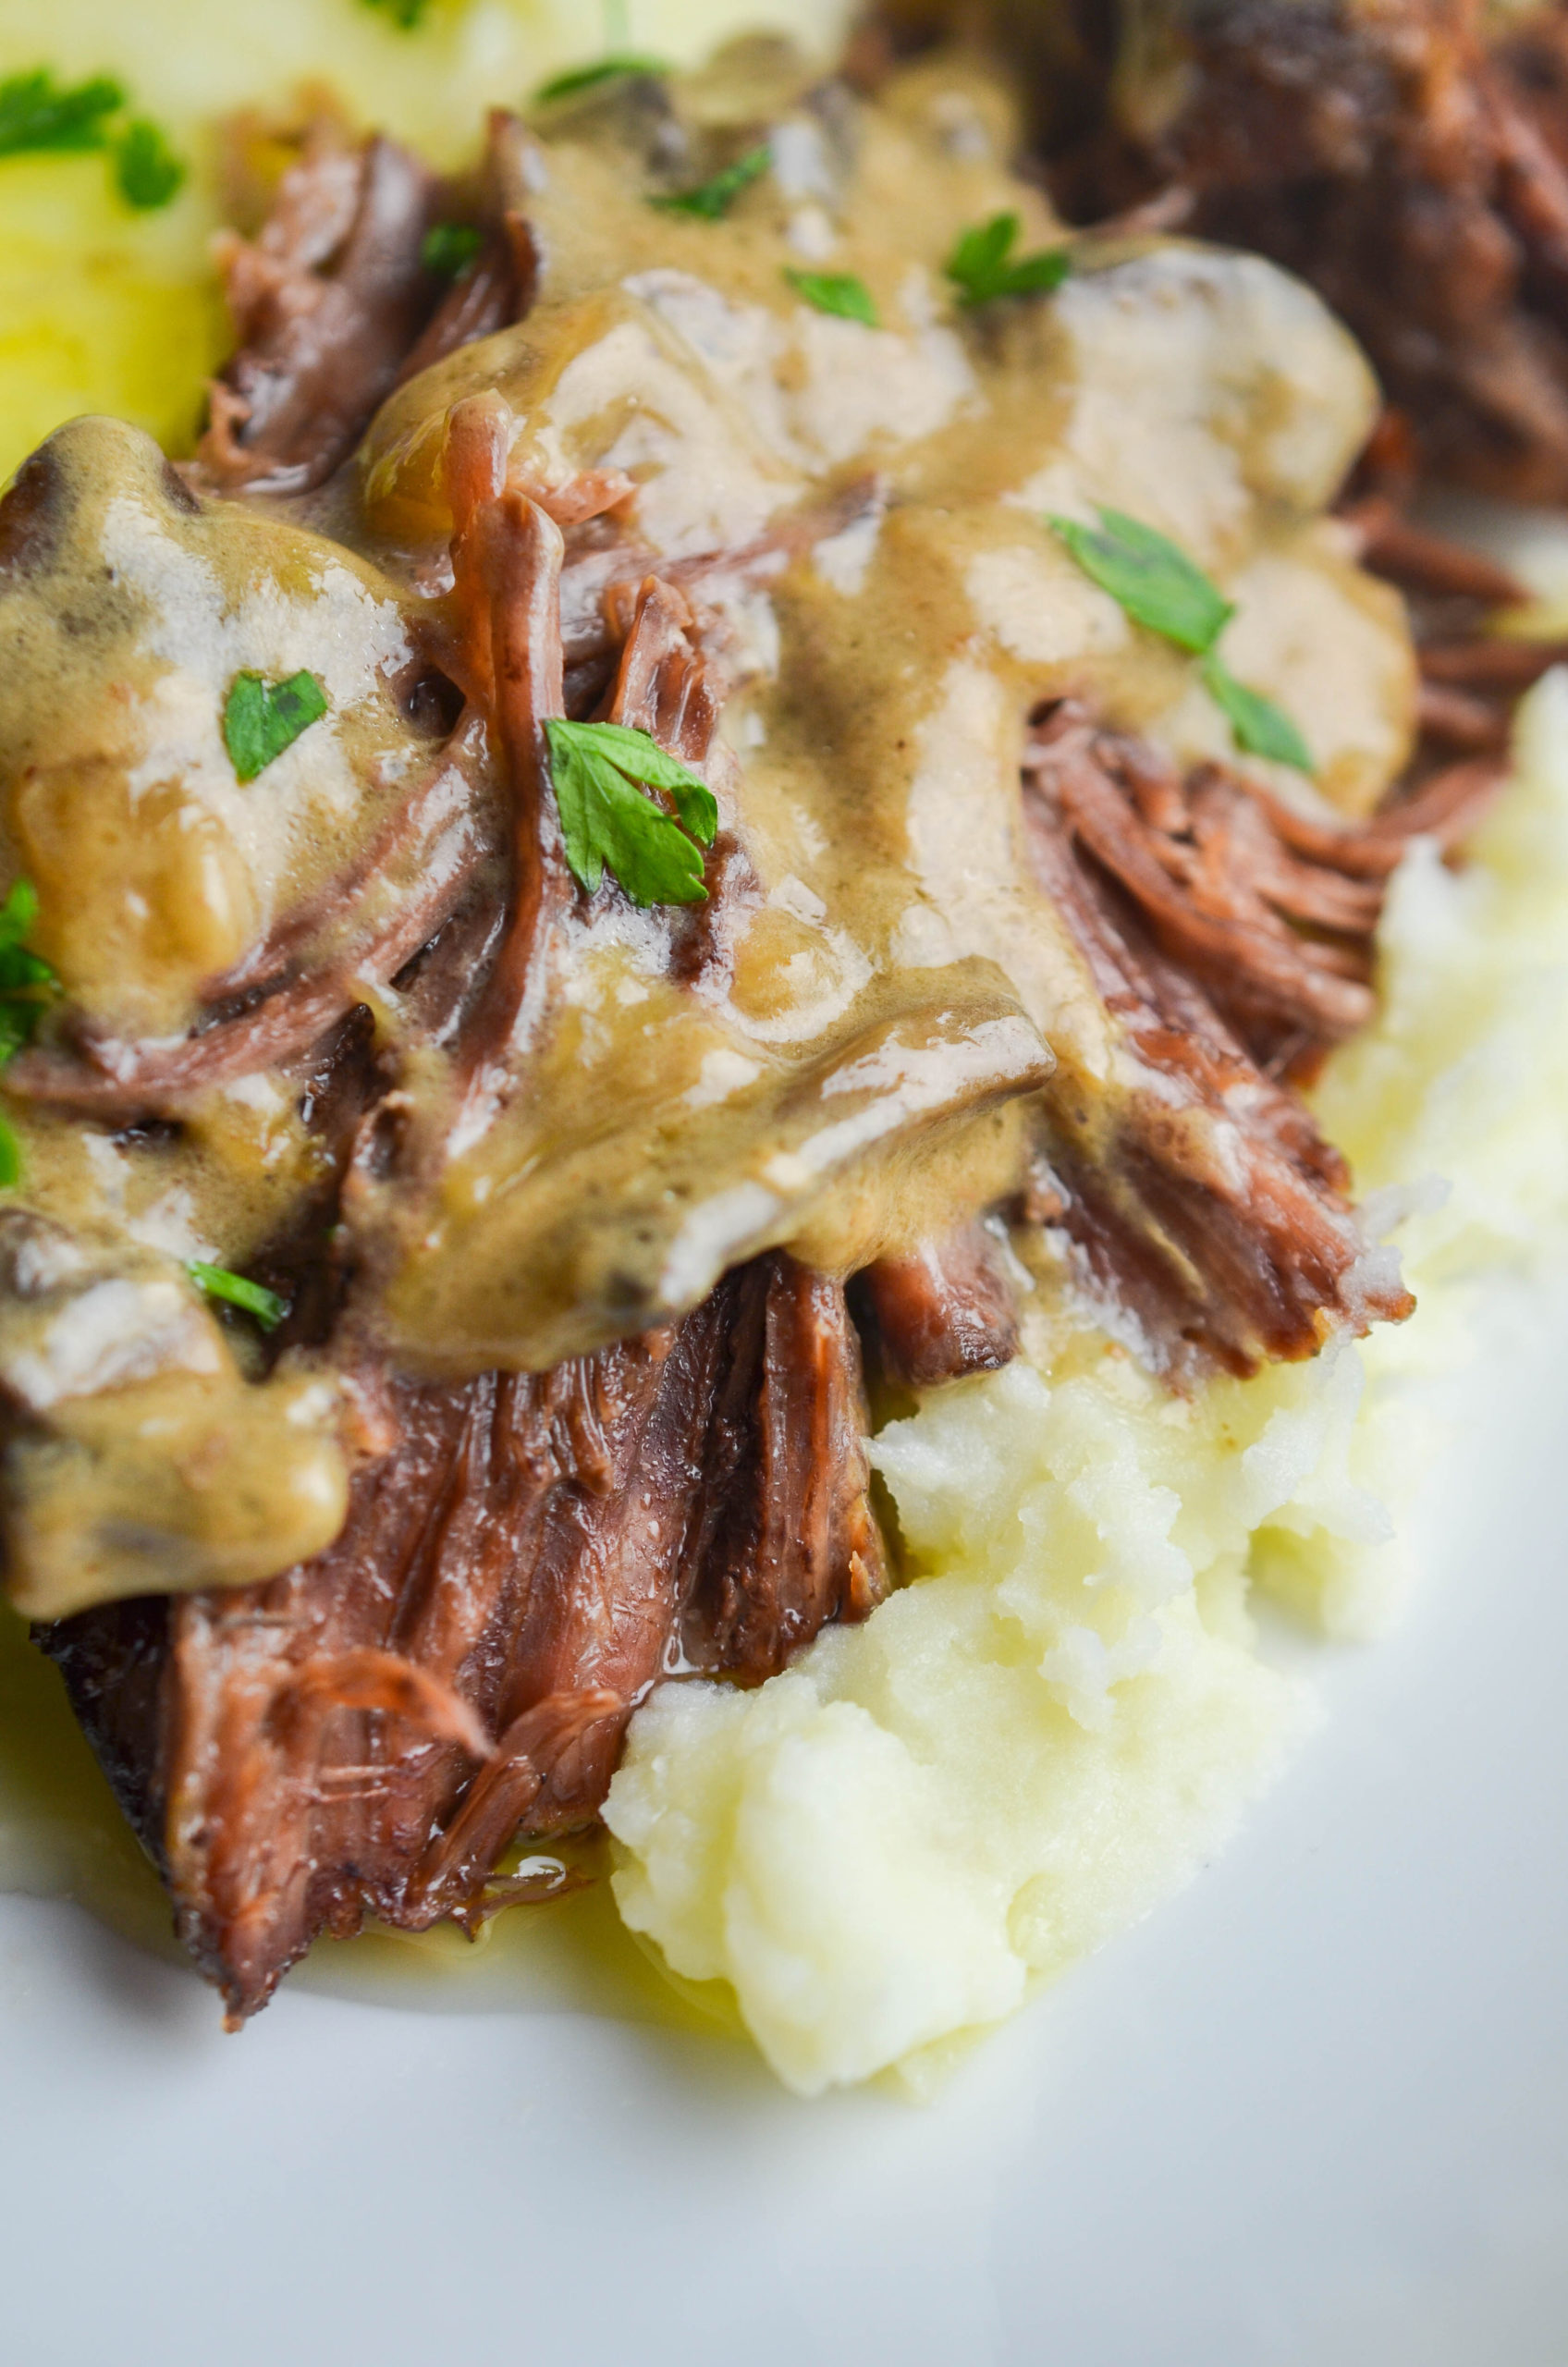 This Dutch Oven Pot Roast is the Perfect Comfort Food